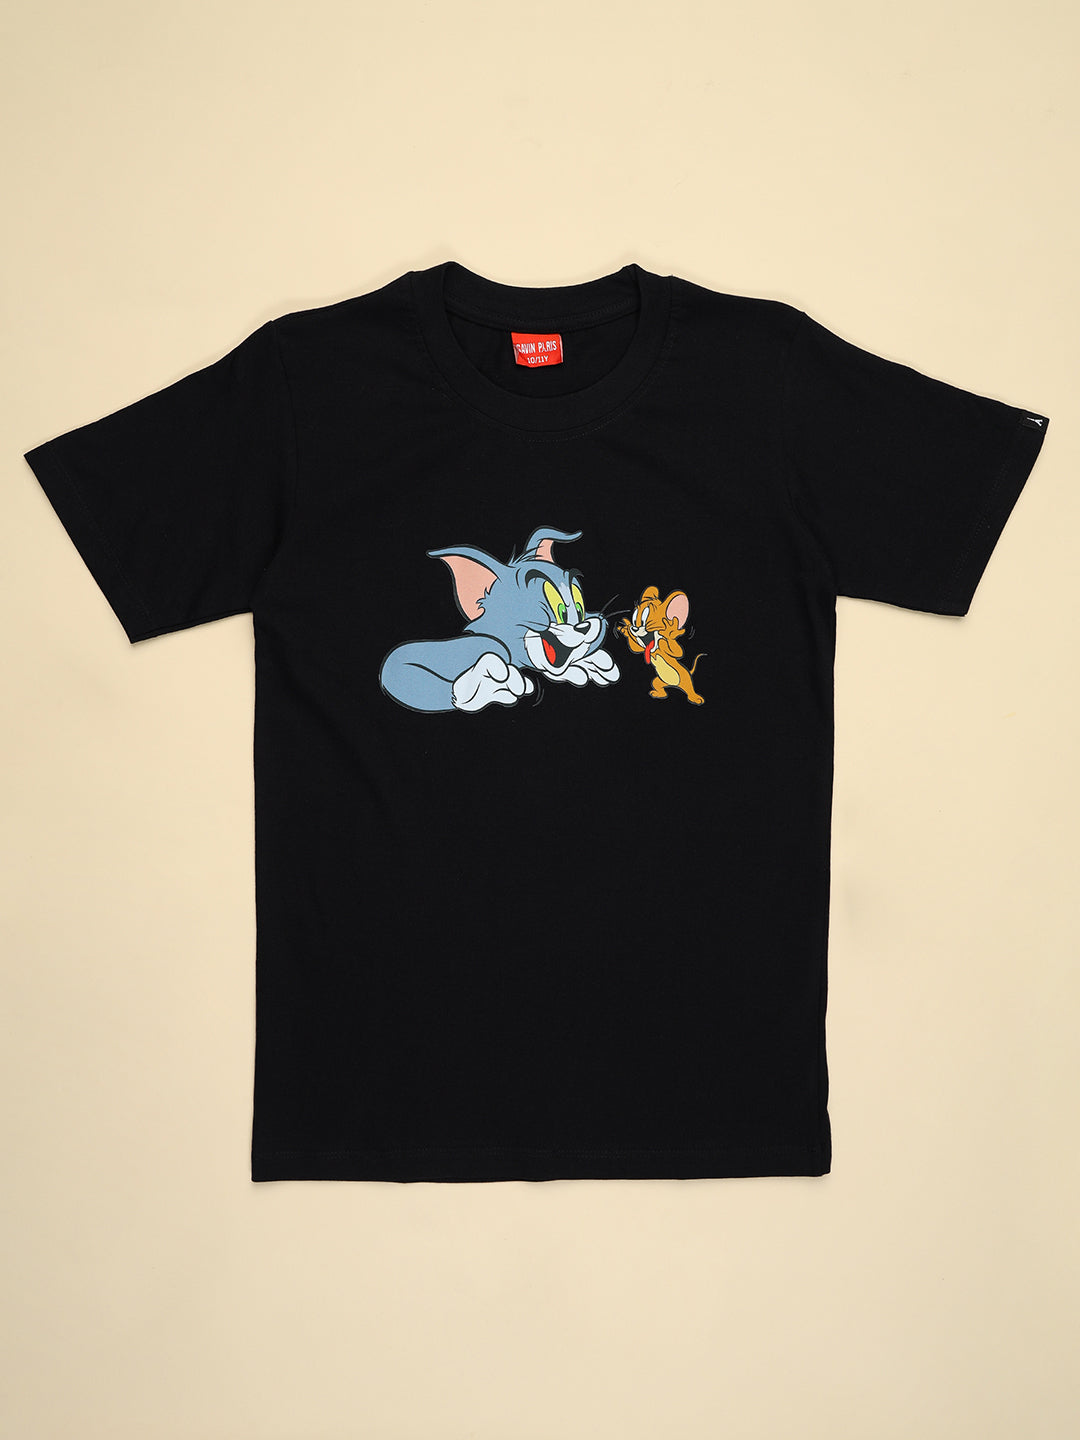 Tom & Jerry Duo T-shirts for Boys & Girls